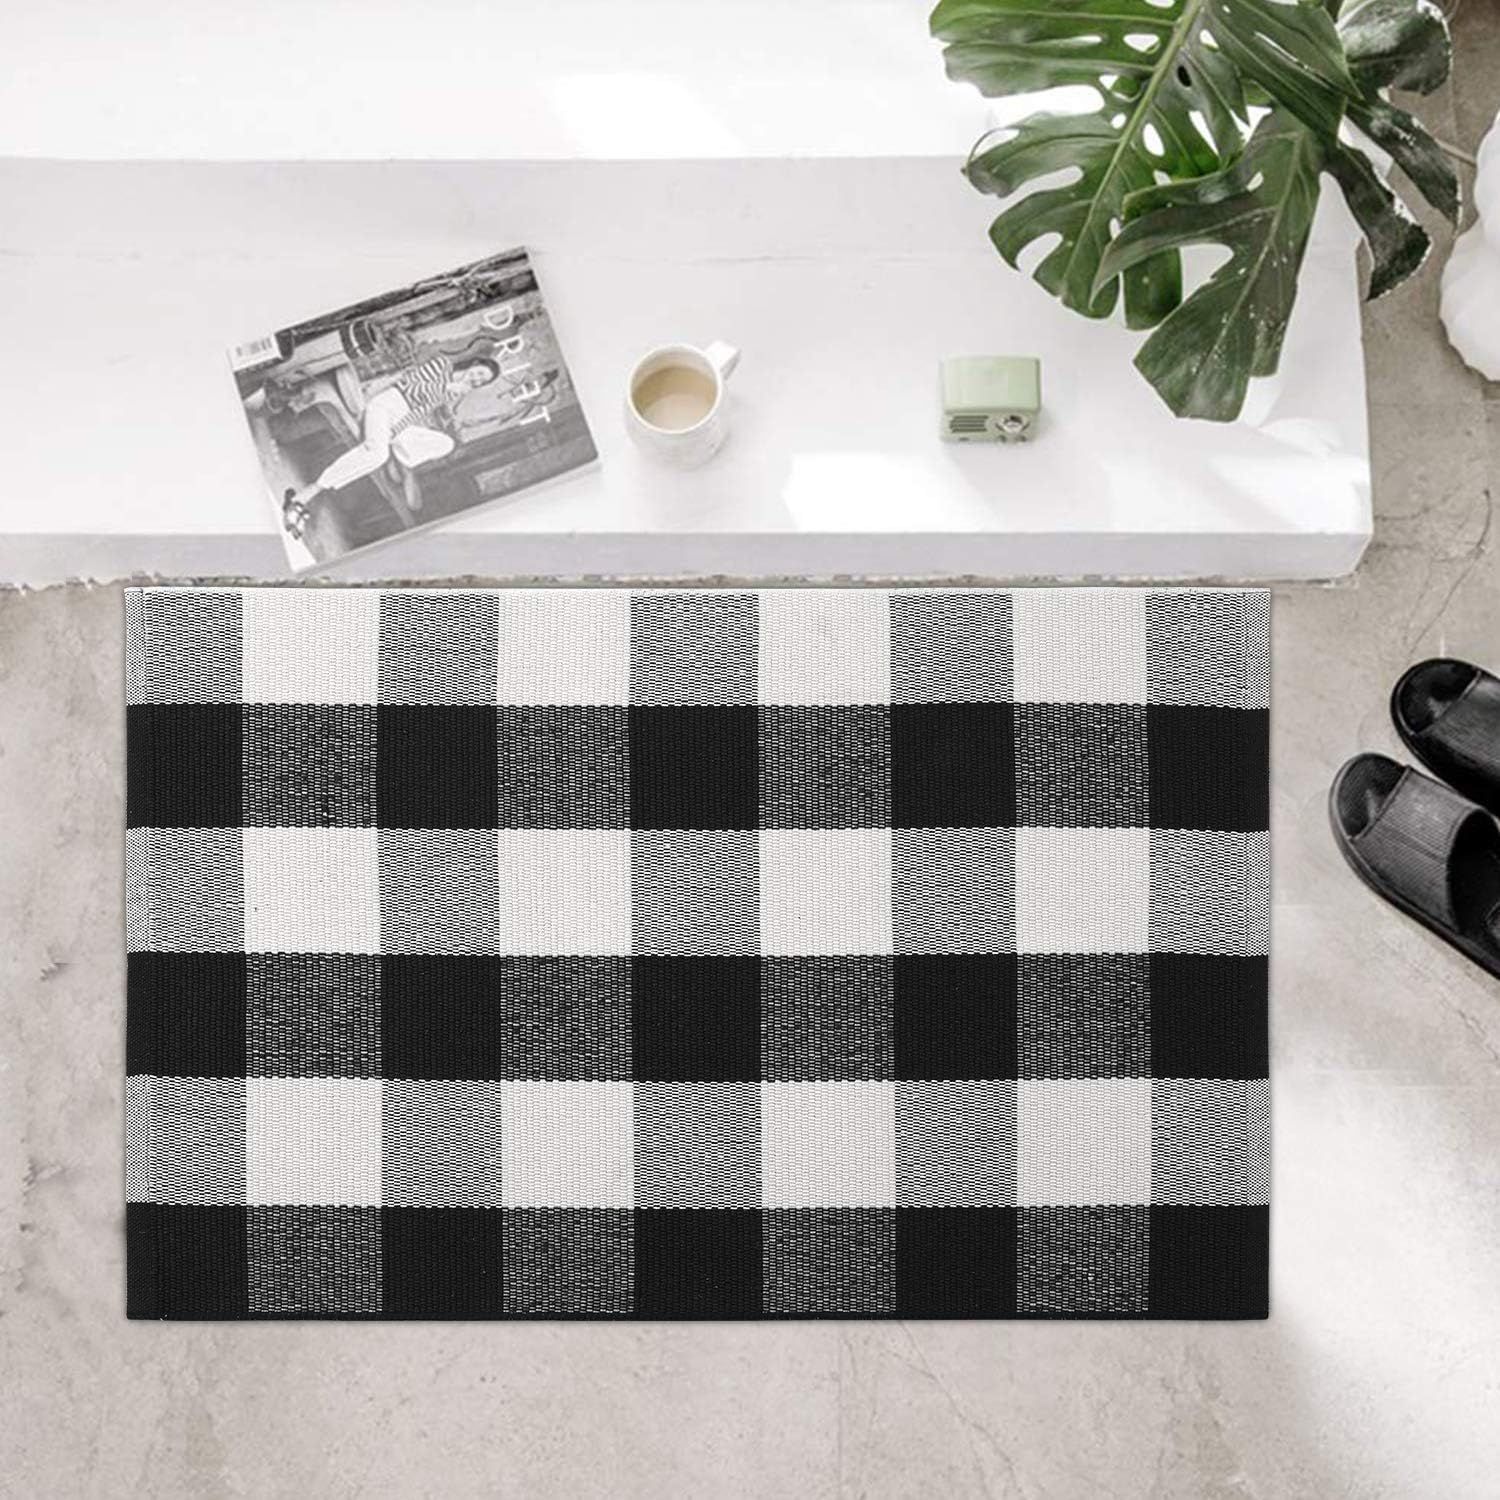 Buffalo Check Outdoor Rug - Black and White Plaid Door Mat - Farmhouse Rugs for Kitchen/Bathroom ... | Amazon (US)